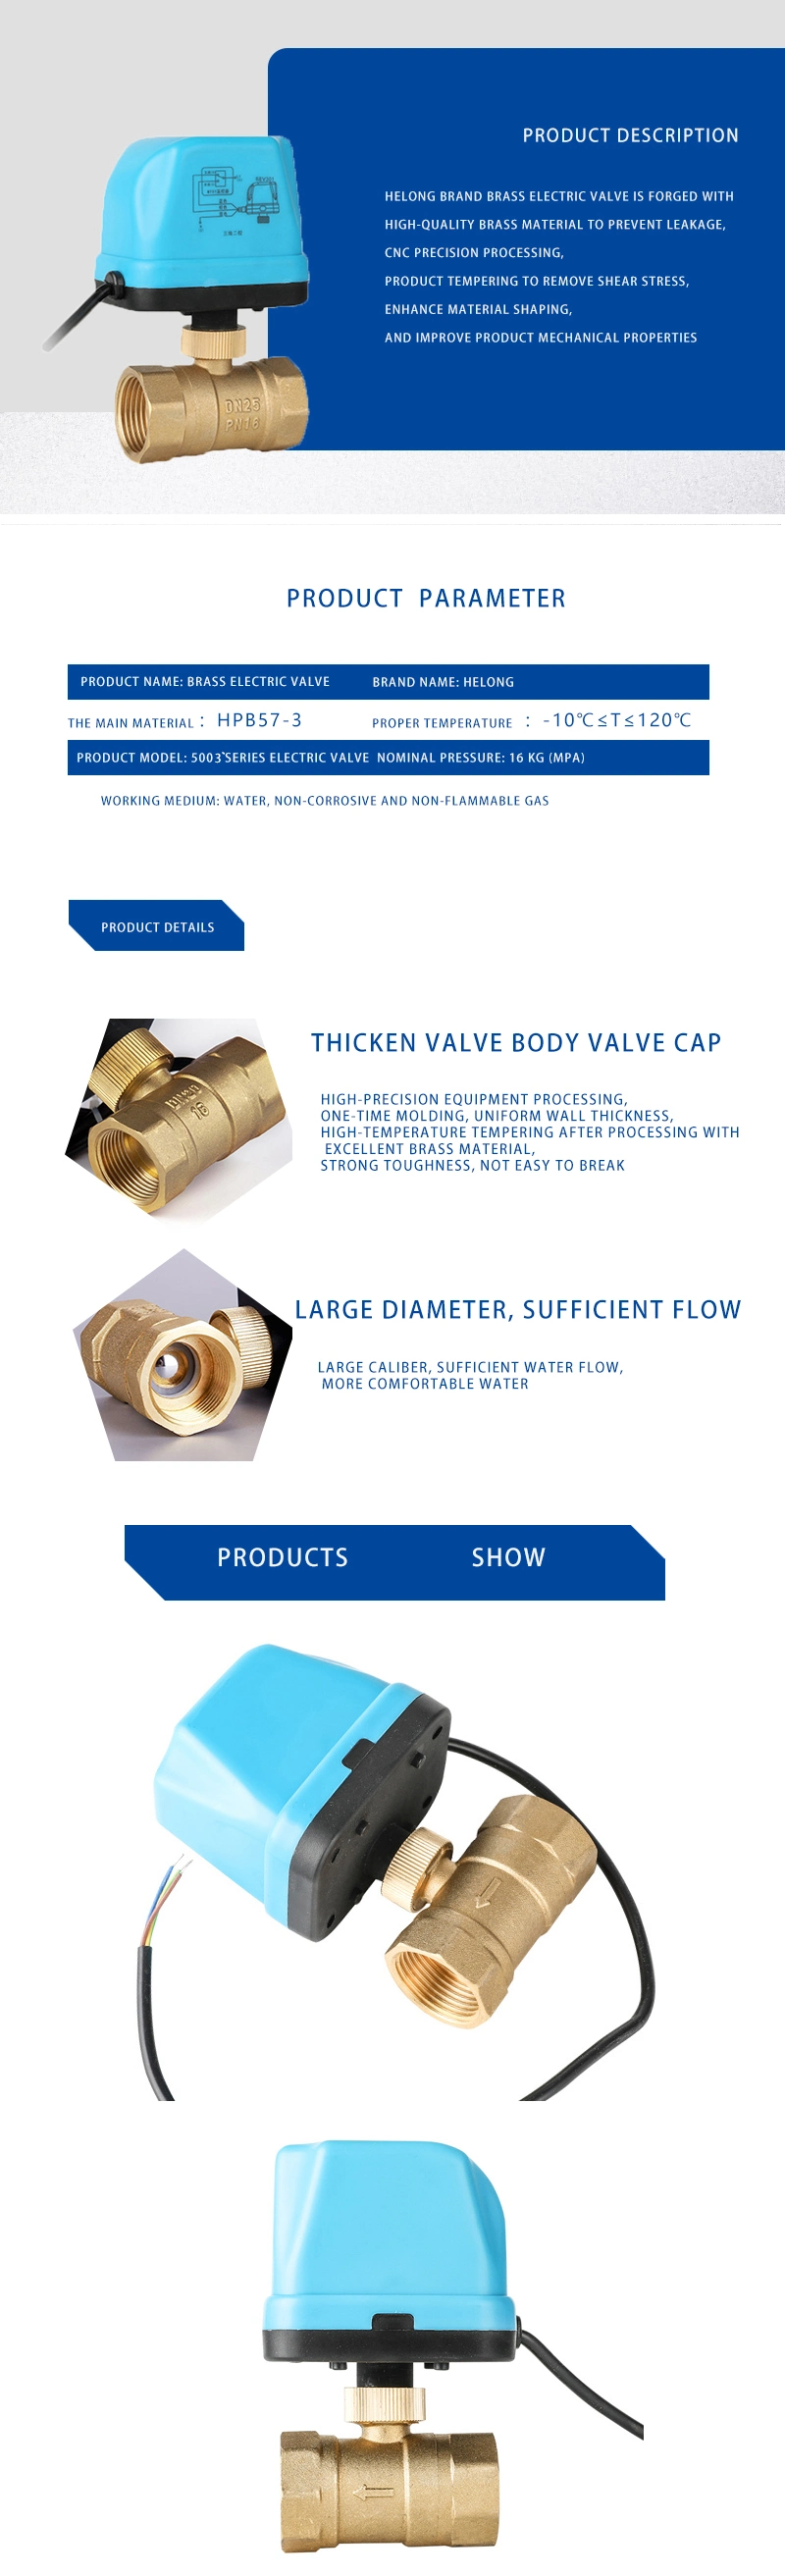 2 Way DN15 Motorized Electric Water Valve Sev3000 Highly Waterproof Electric Ball Valve Sev-250